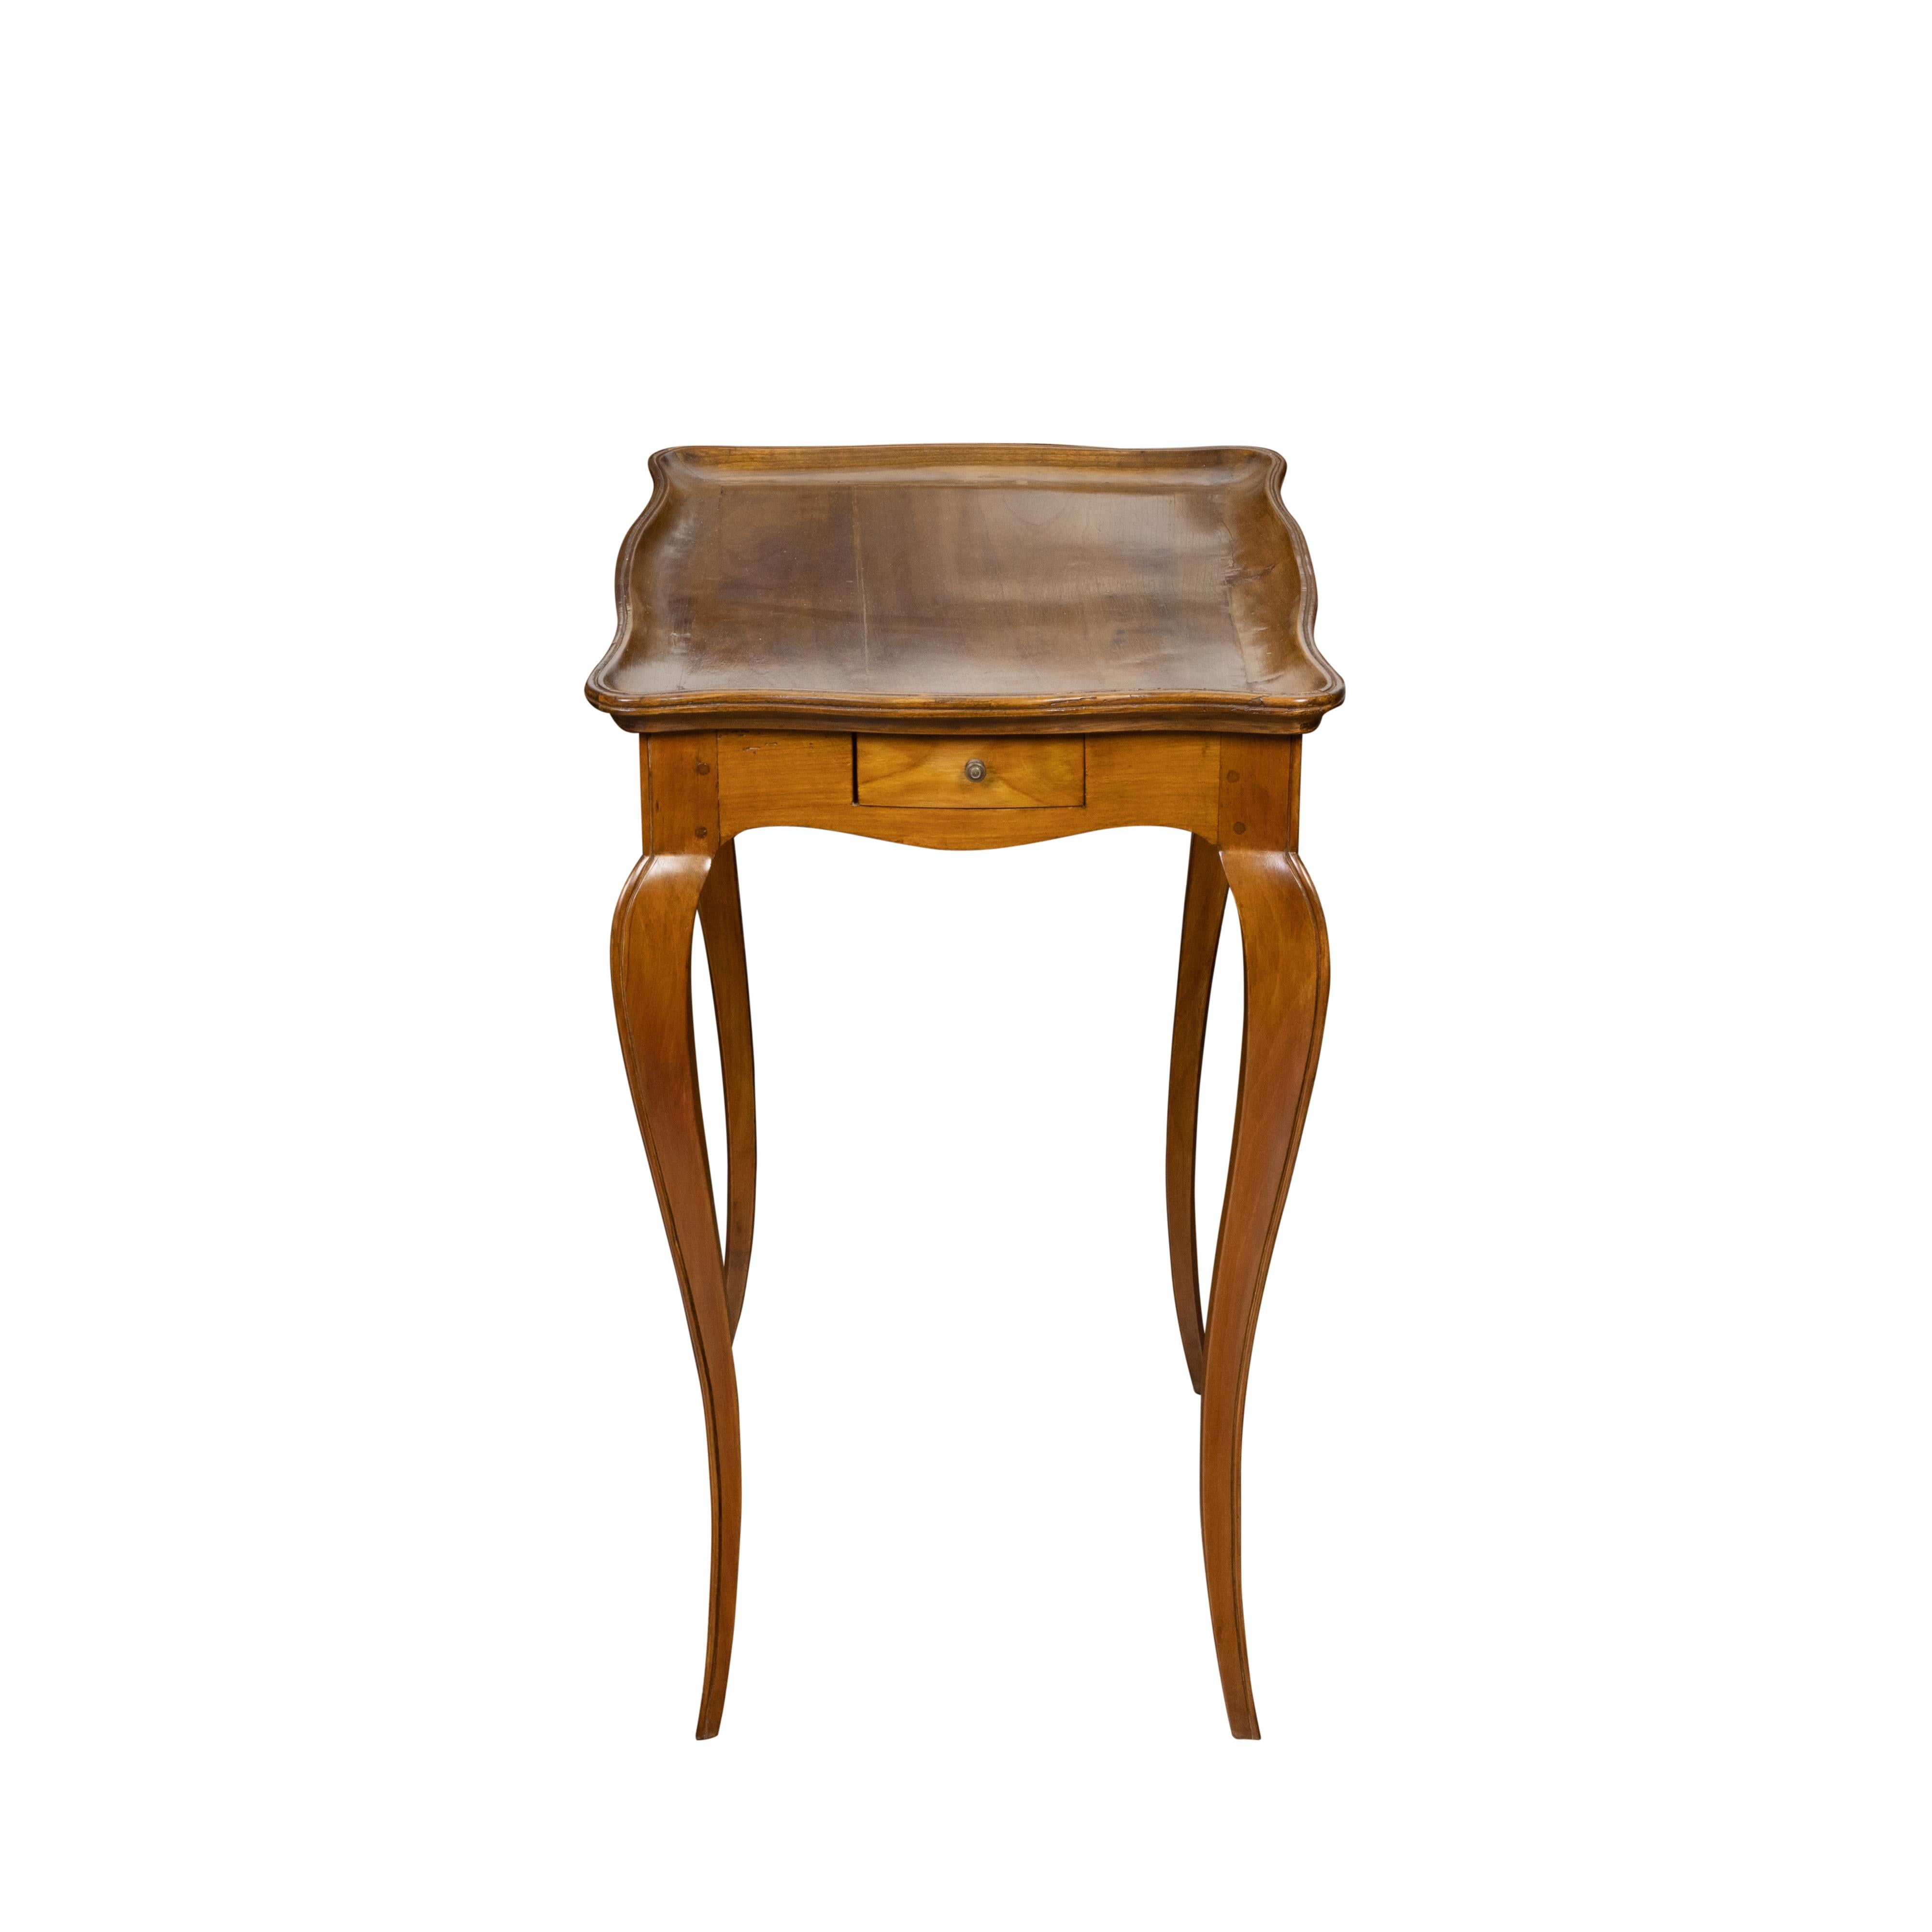 French 19th Century Louis XV Style Walnut Side Table with Serpentine Tray Top For Sale